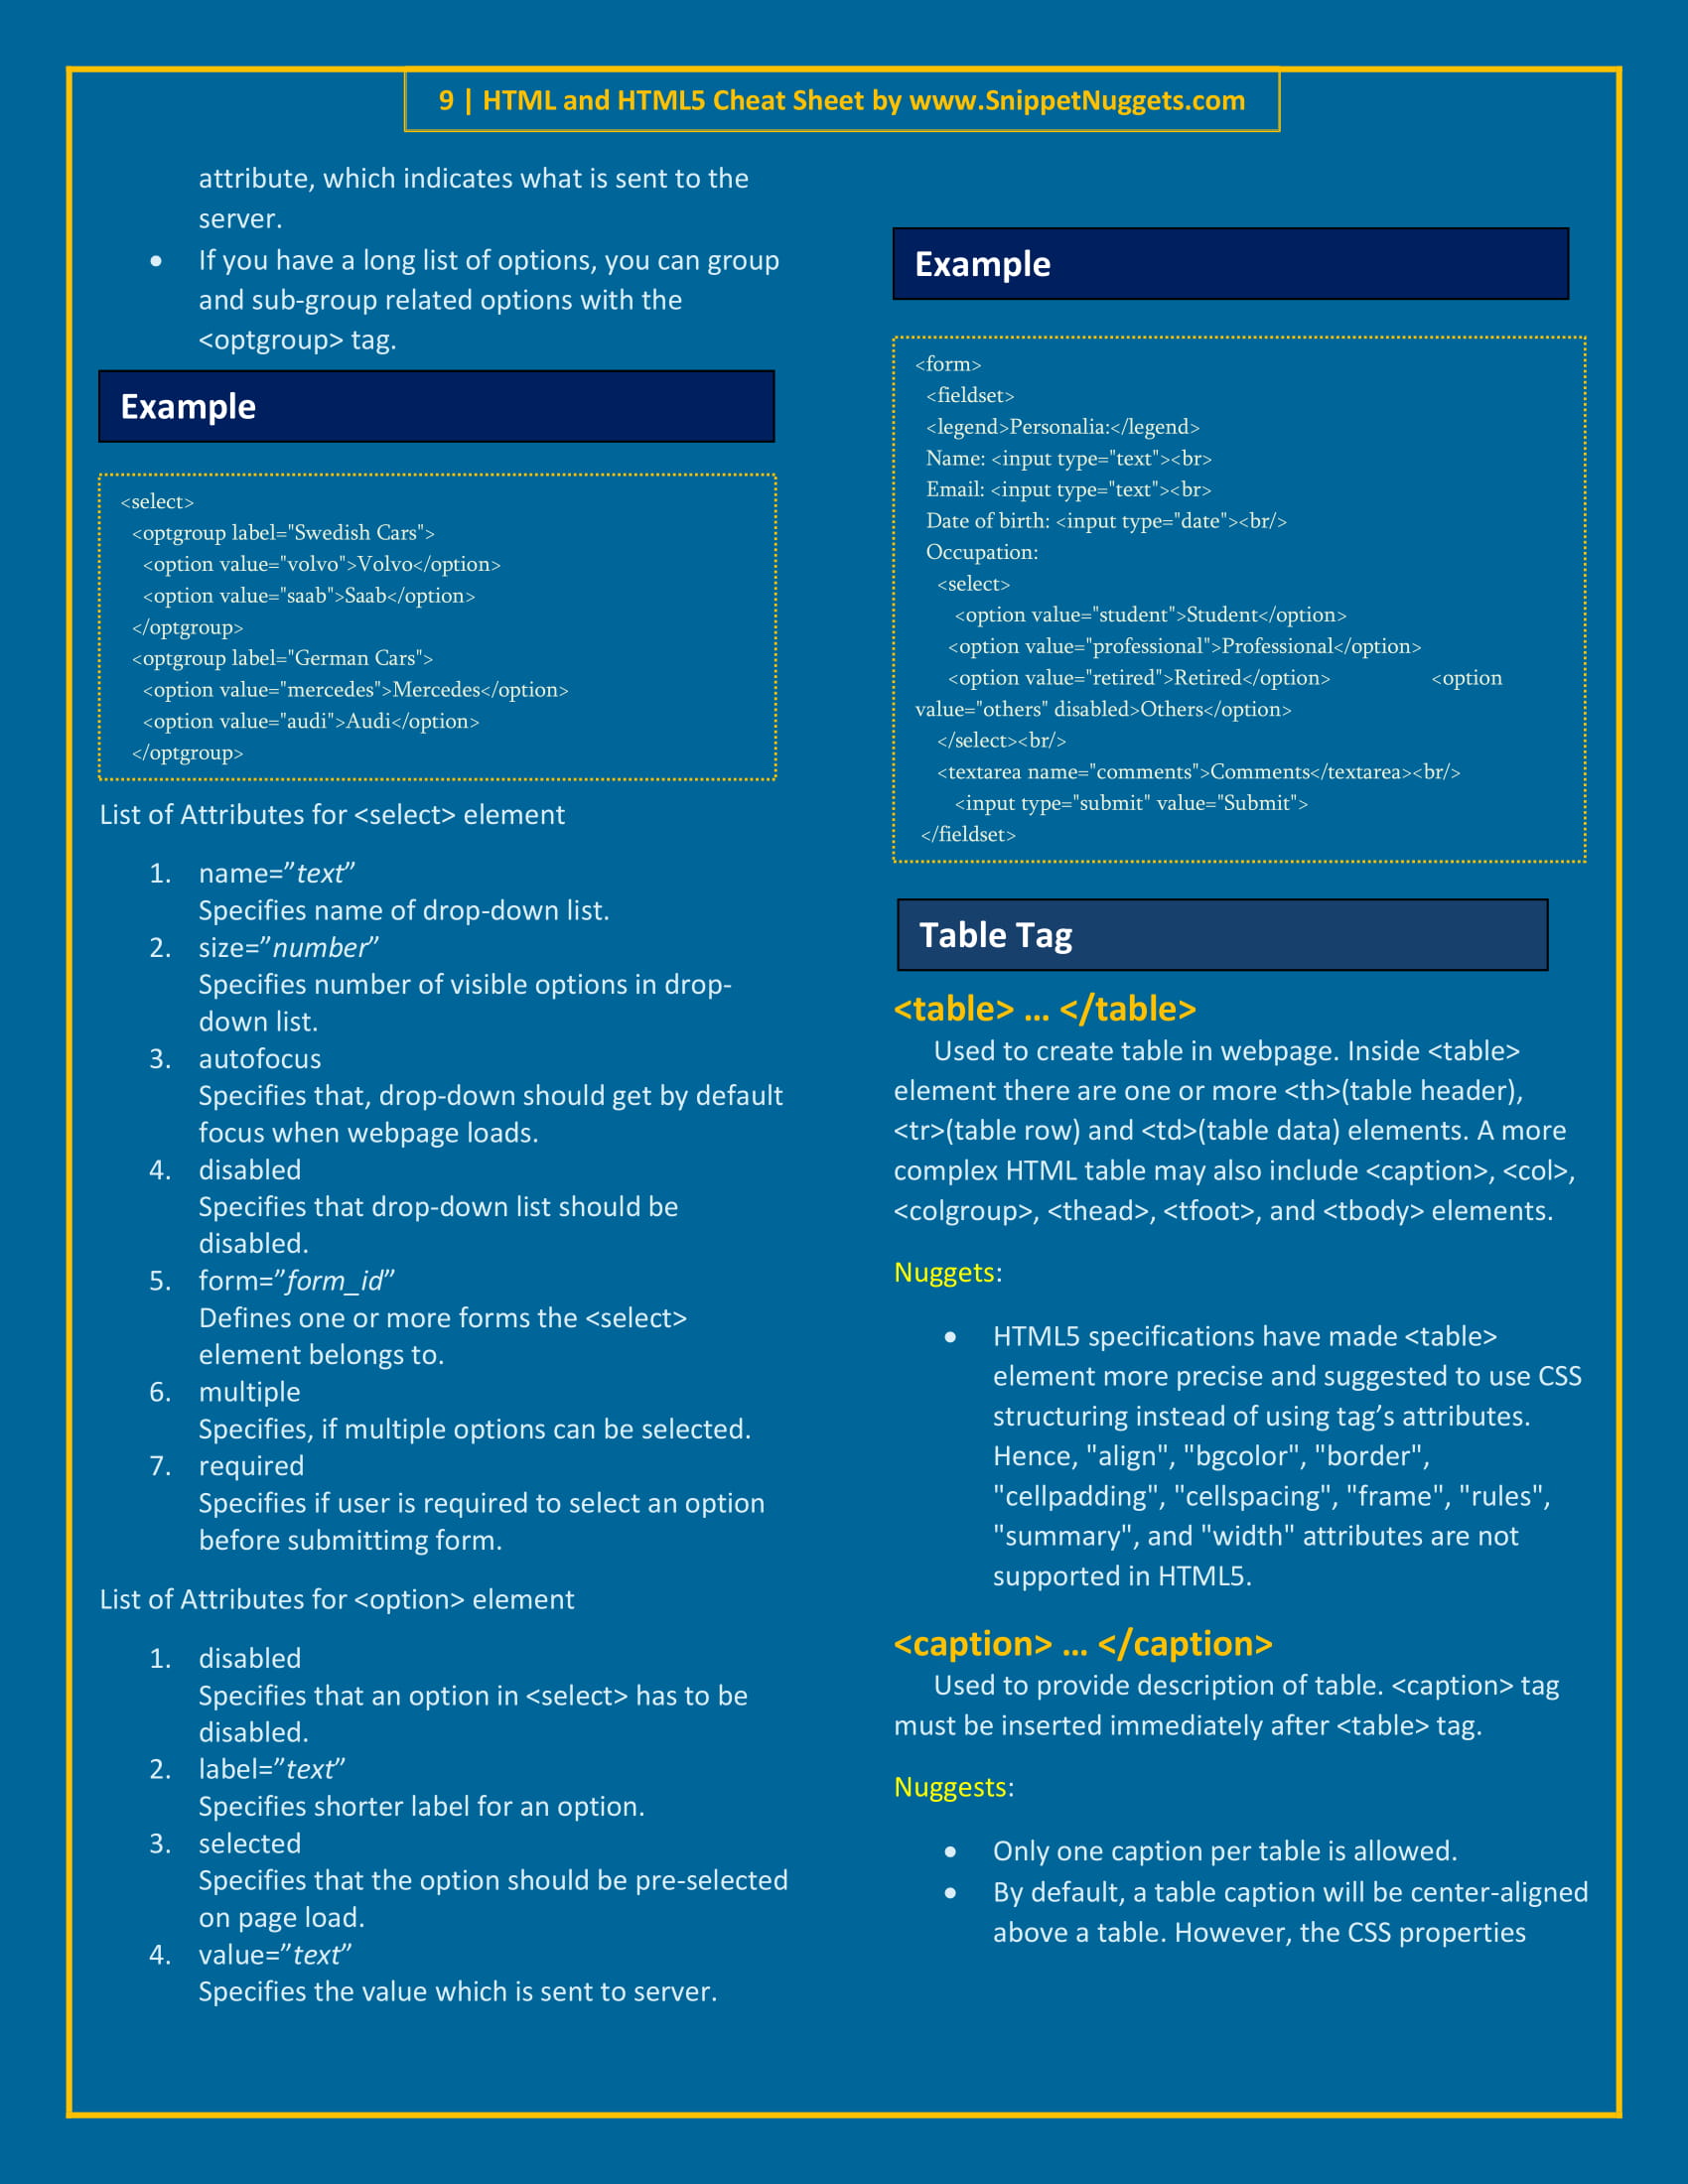 html cheat sheet for 2019 select option tag attribute table caption  www.snippetnuggets.com